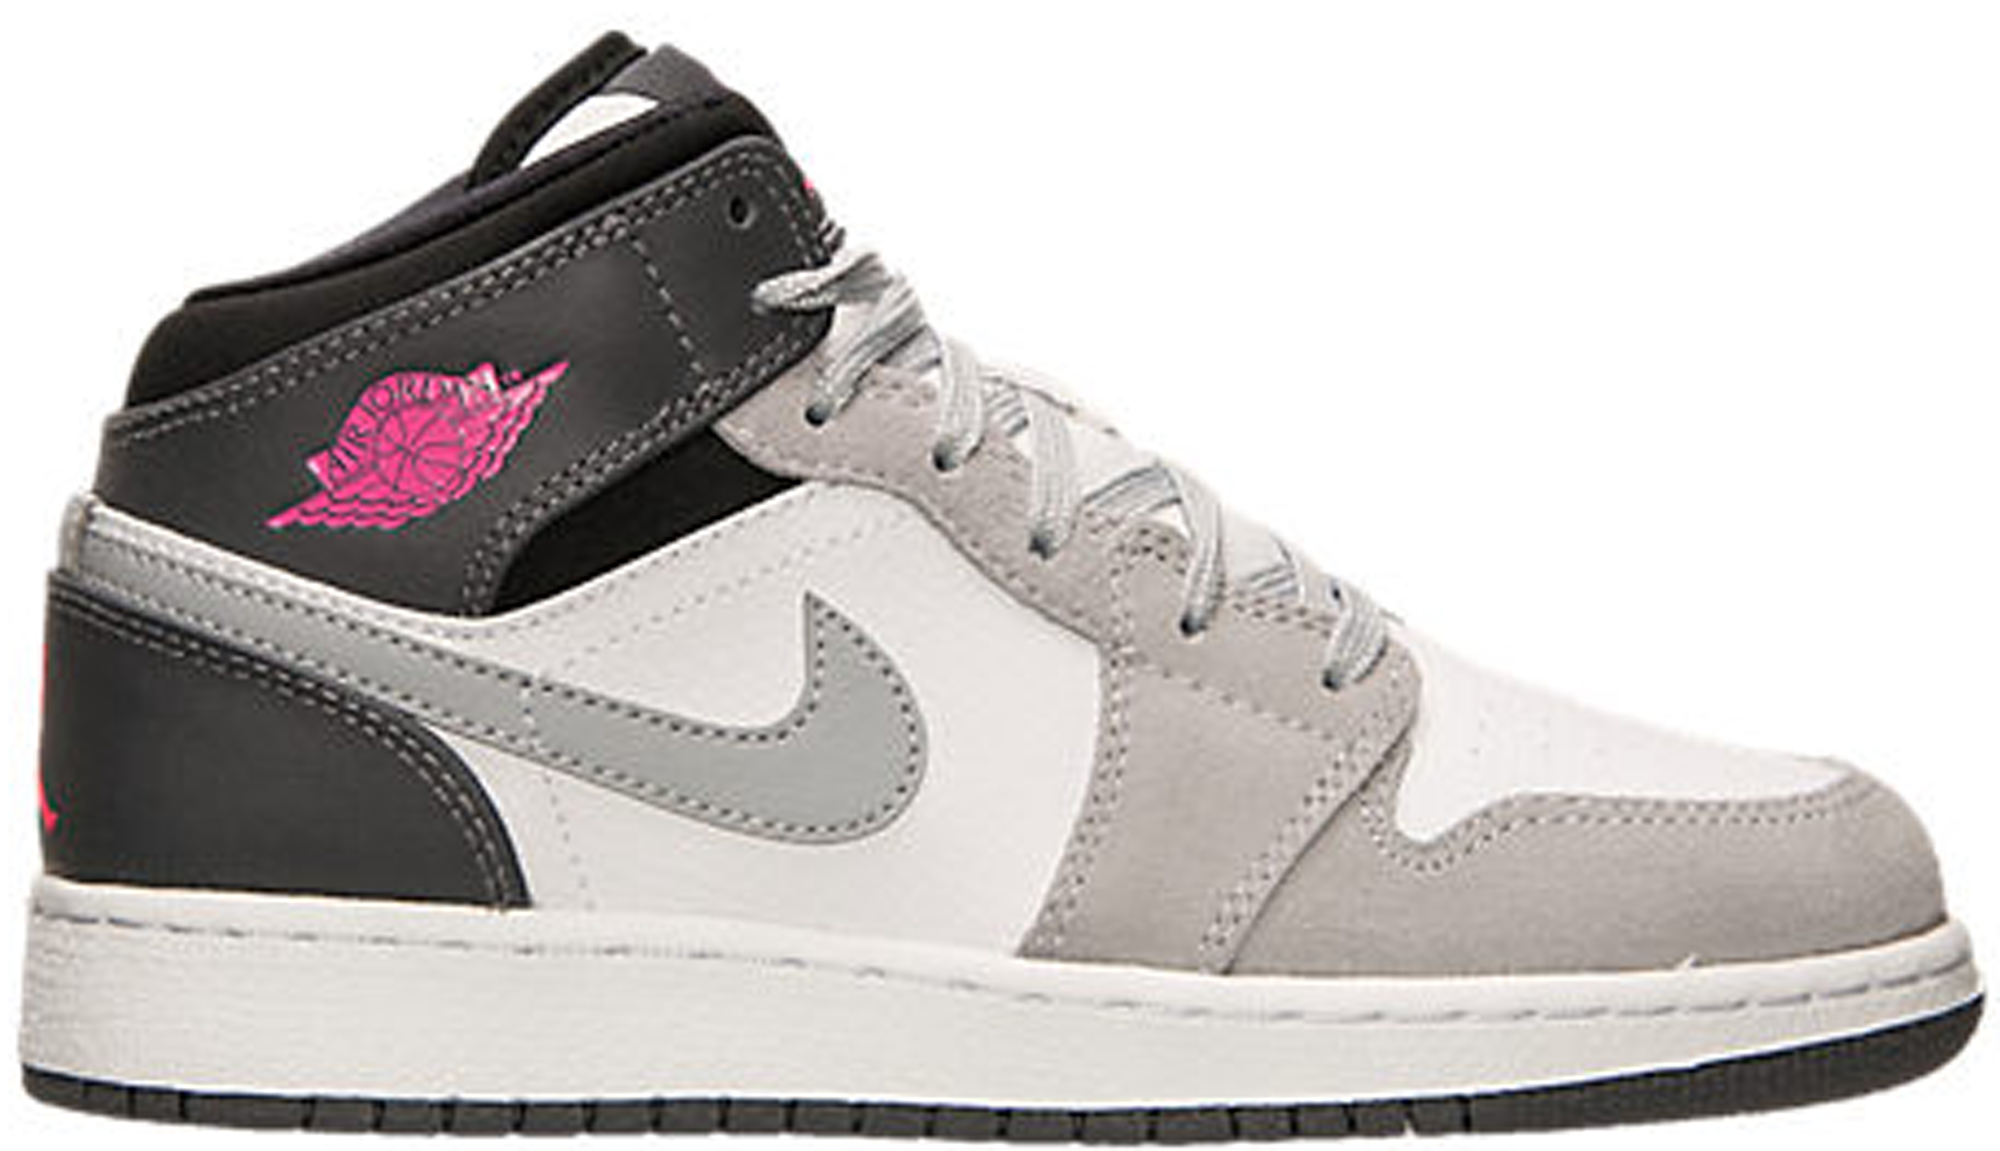 gray white and pink jordans